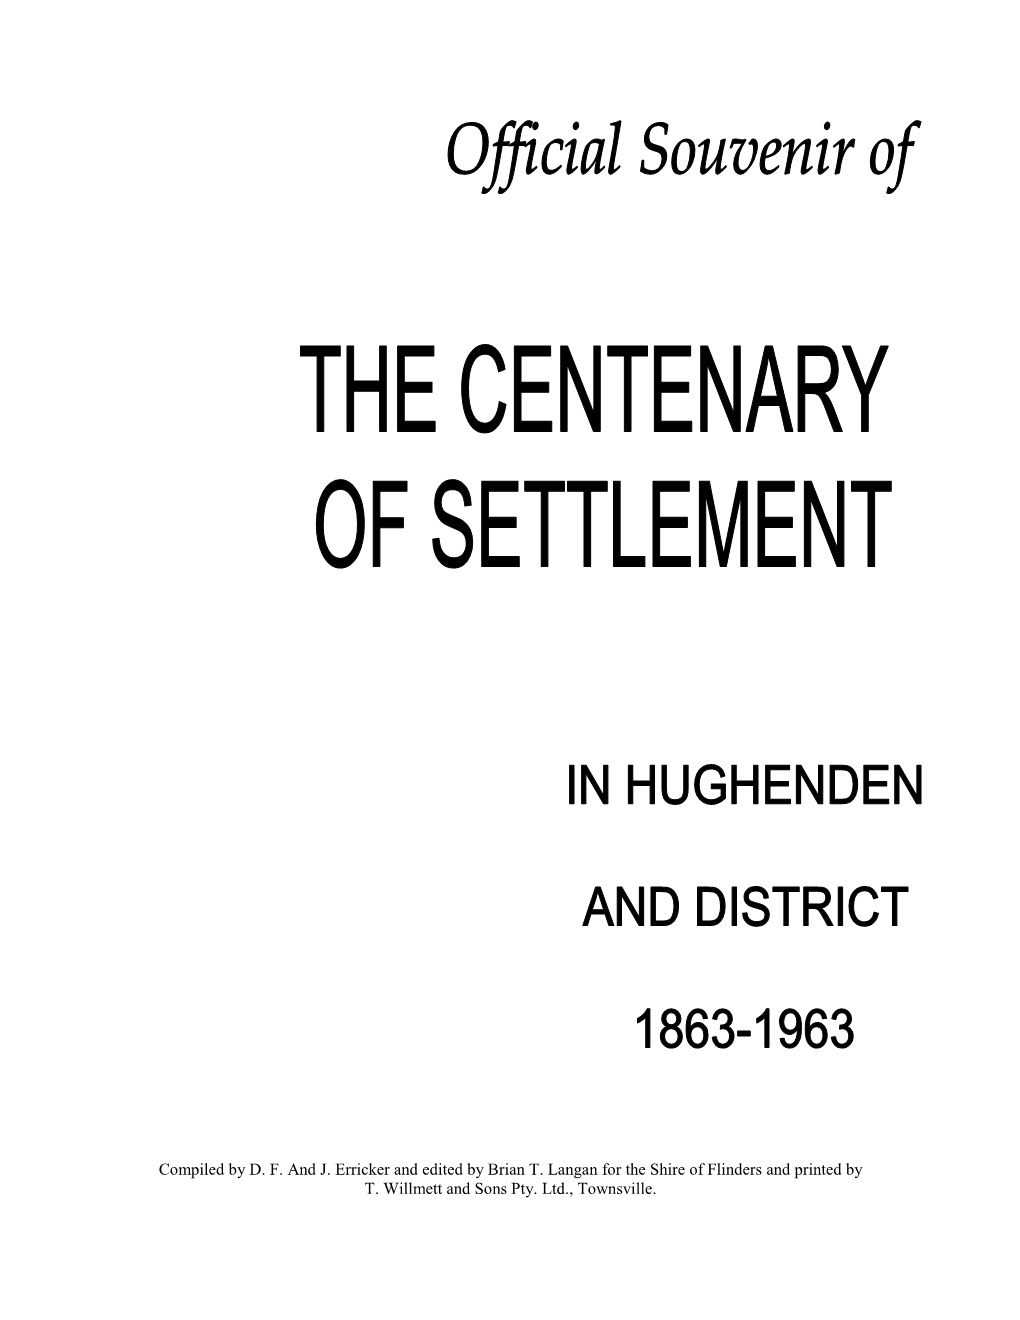 Early Settlement of Hughenden and District